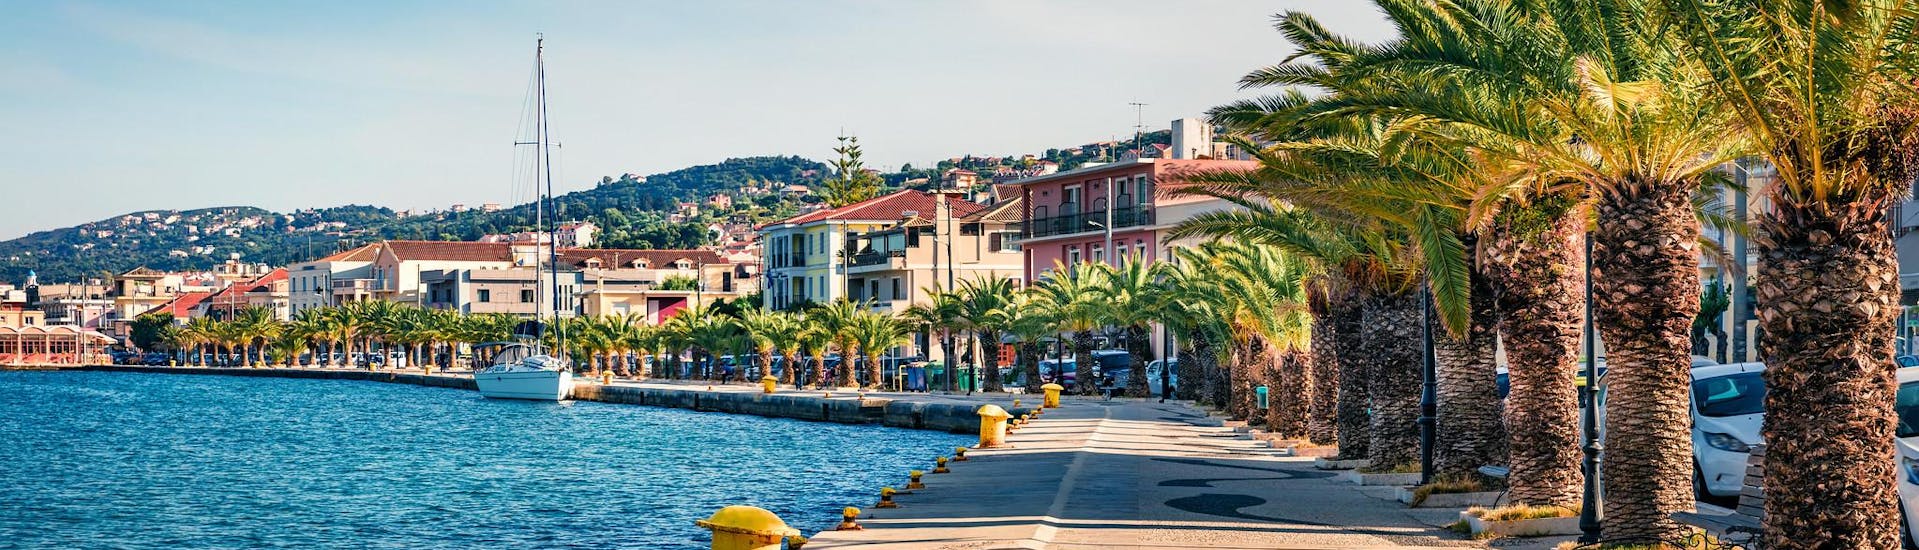 View of the Argostoli port, a beautiful departure point for boat trips in Kefalonia island, Greece.